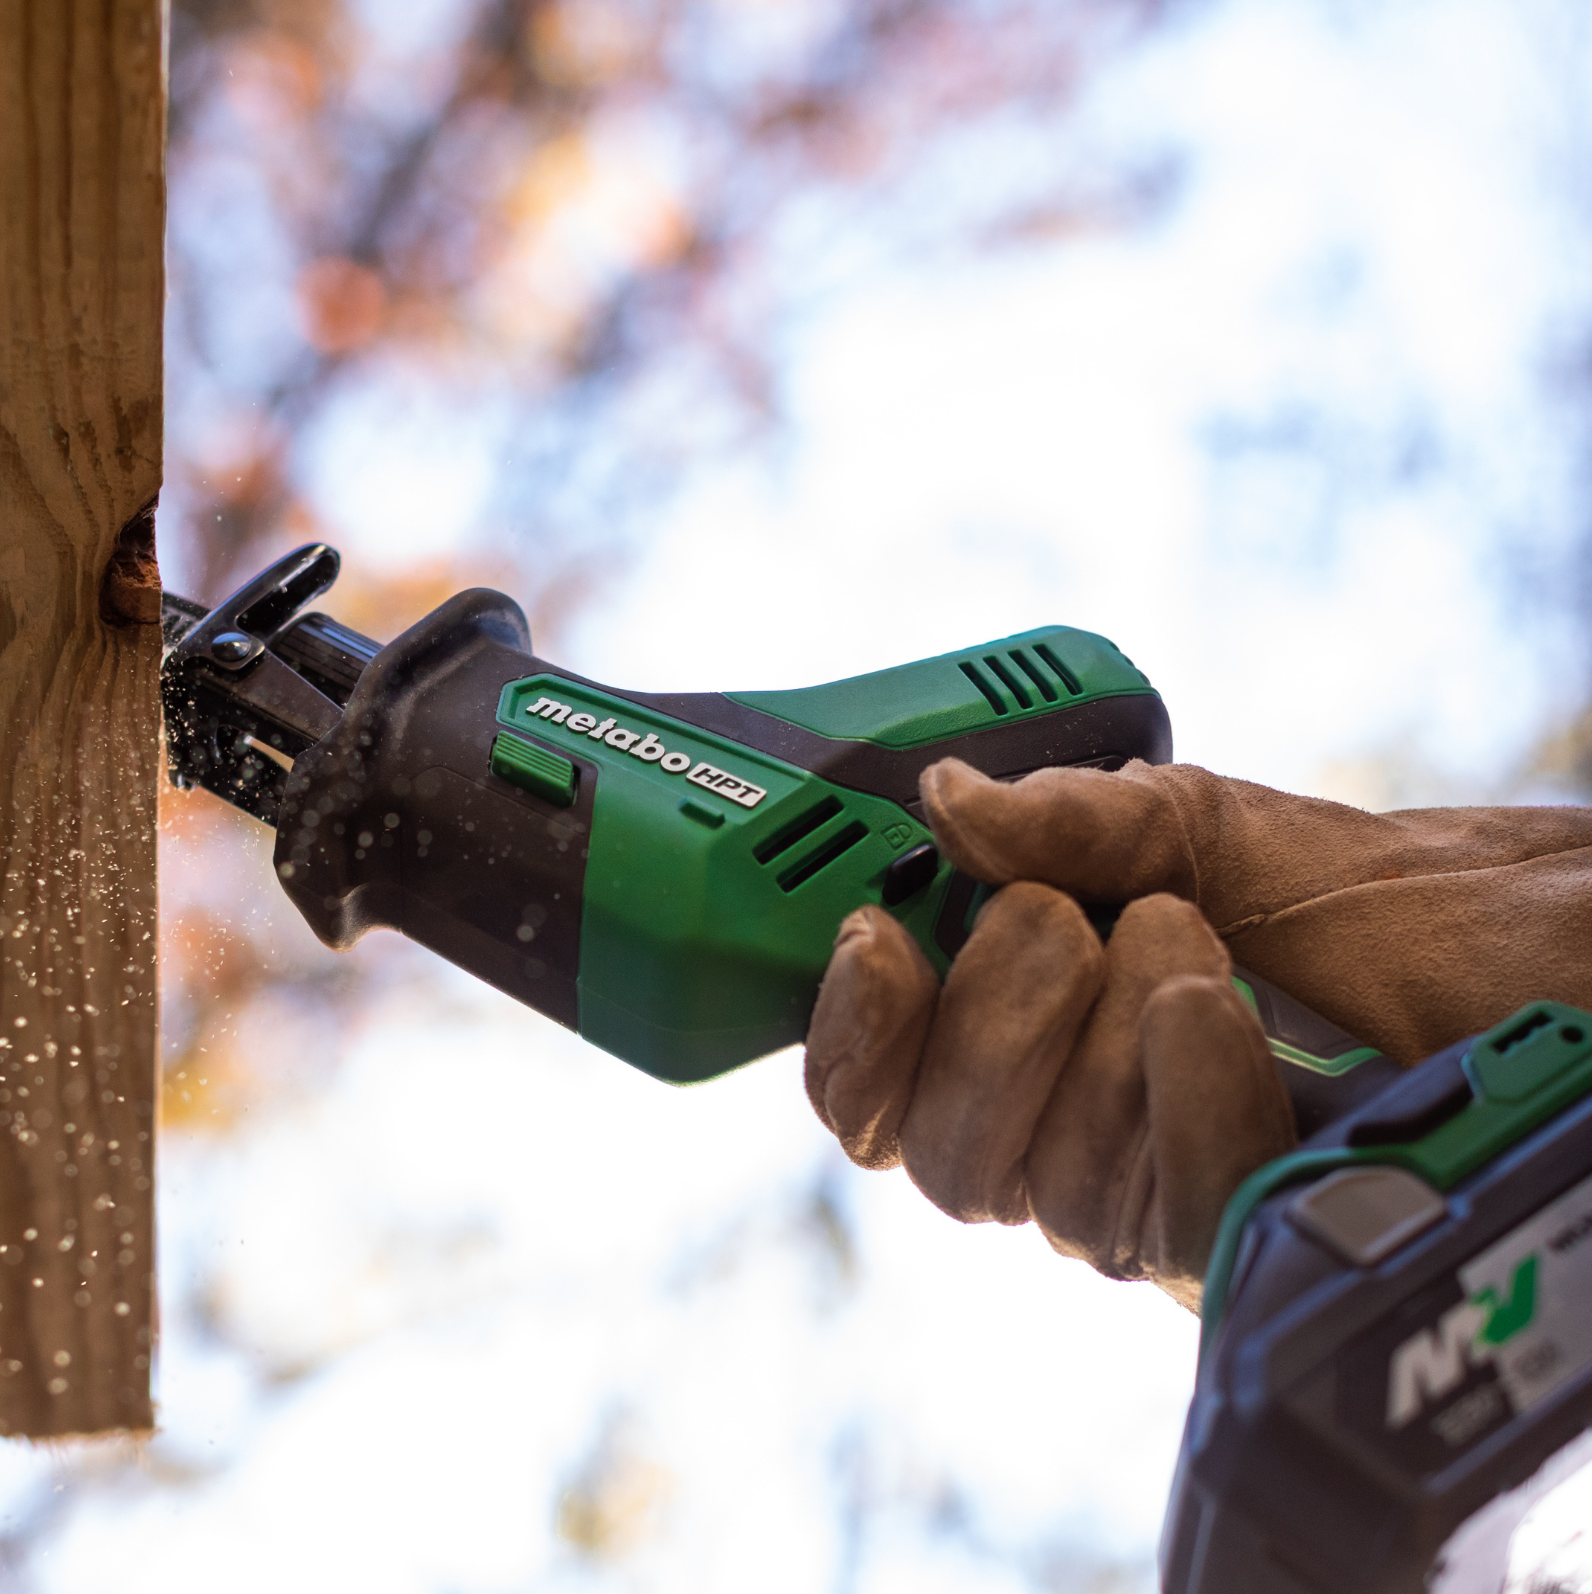 Metabo-HPT's One-Handed Reciprocating Saw Is Small But Mighty